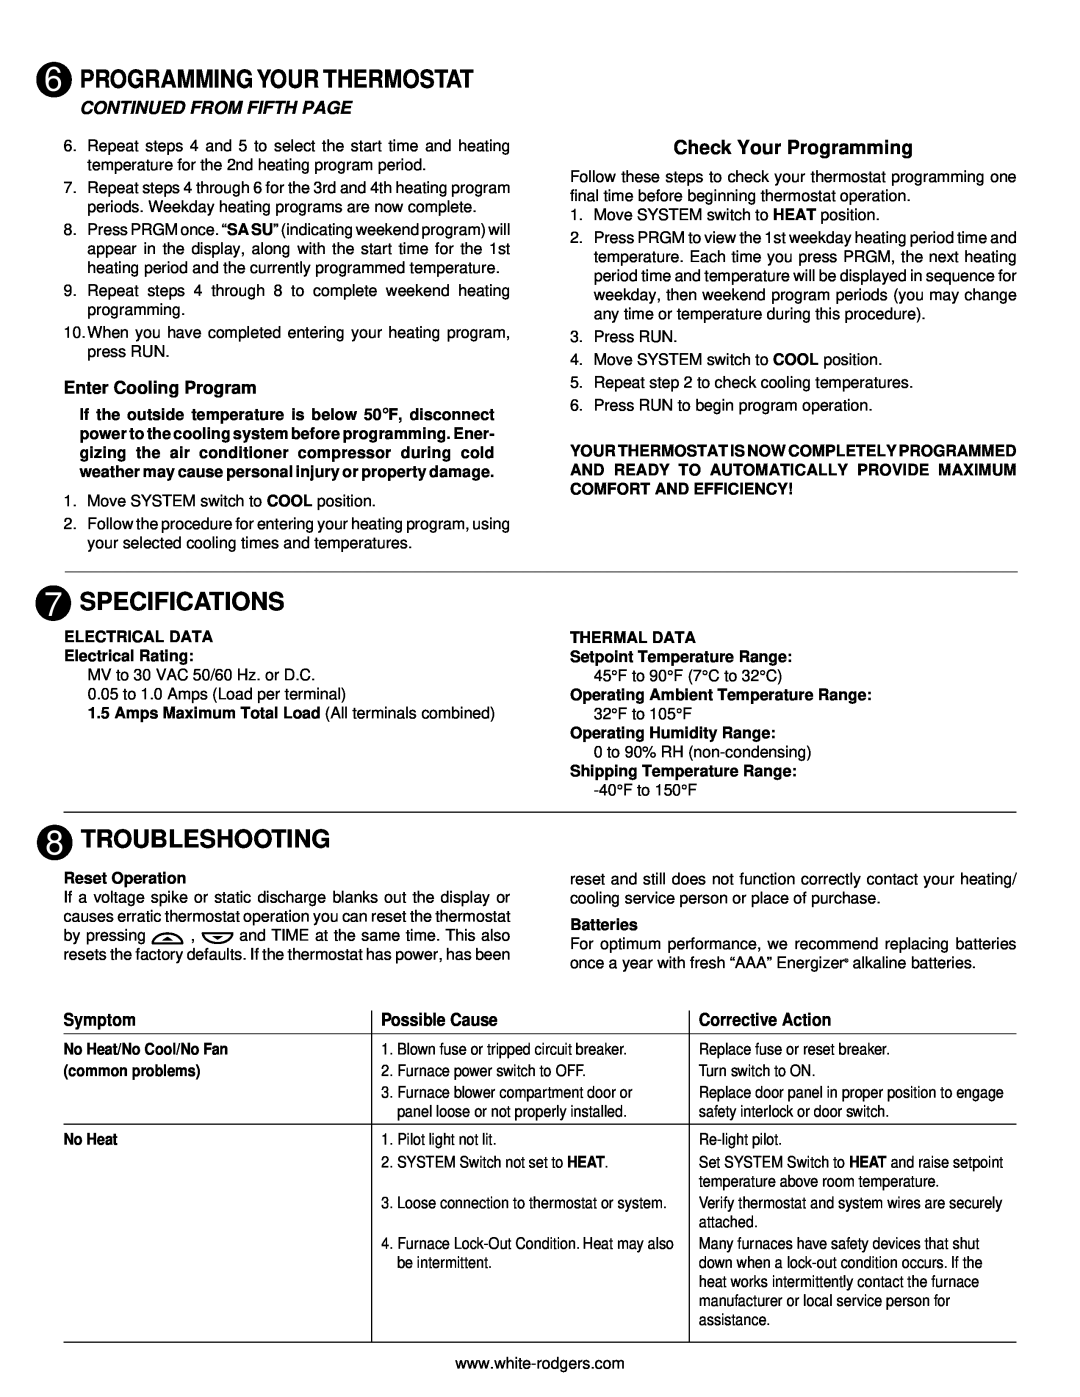 White Rodgers 1.00E+78 Specifications, Troubleshooting, Check Your Programming, Continued From Fifth Page, Symptom 